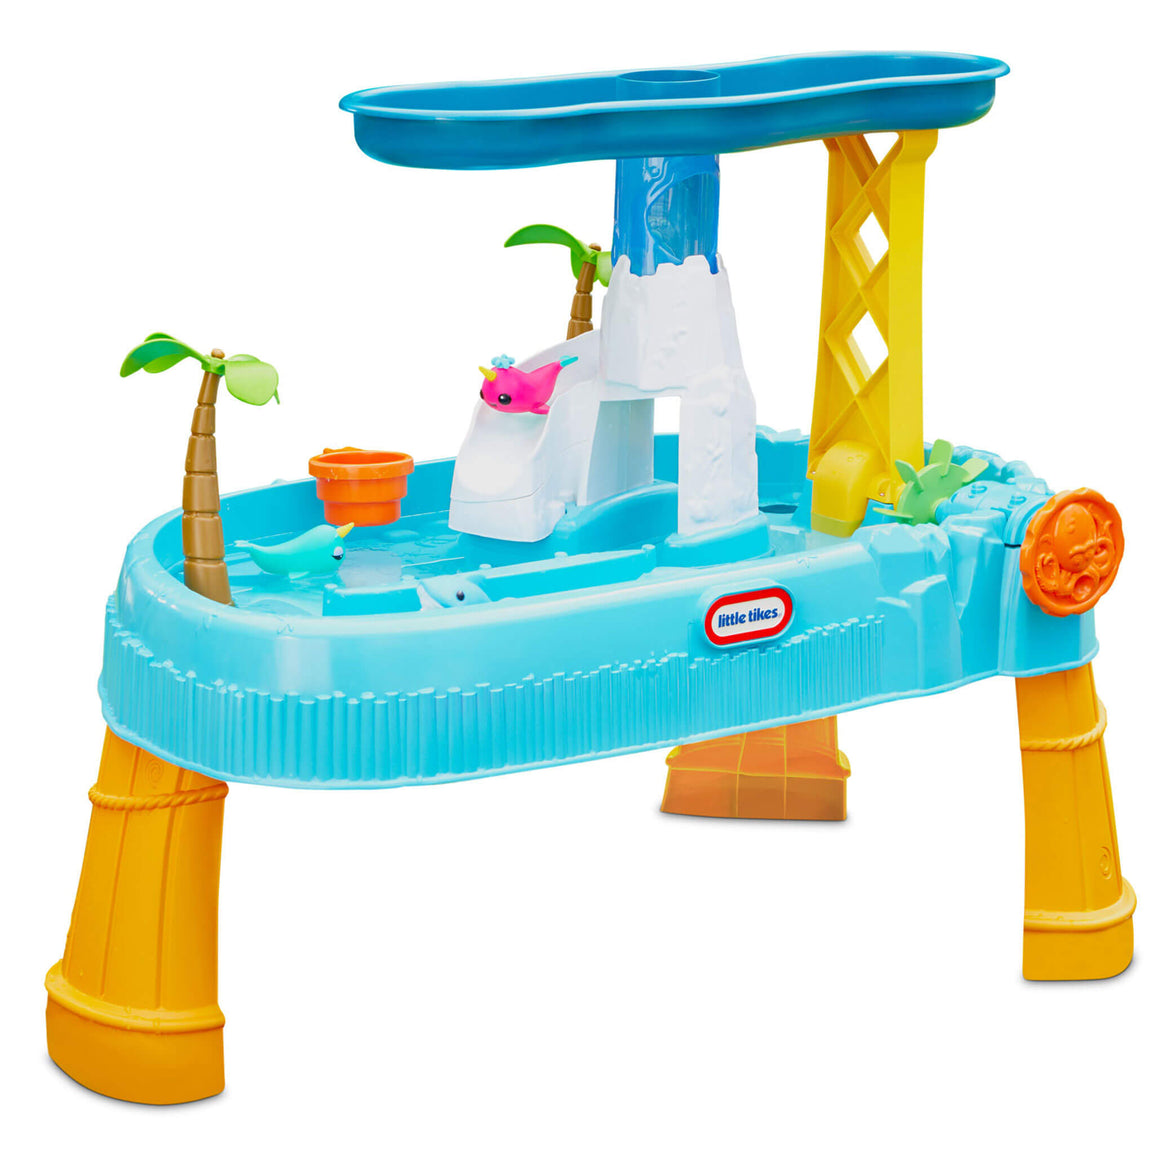 Waterfall Island Water Table - Official Little Tikes Website